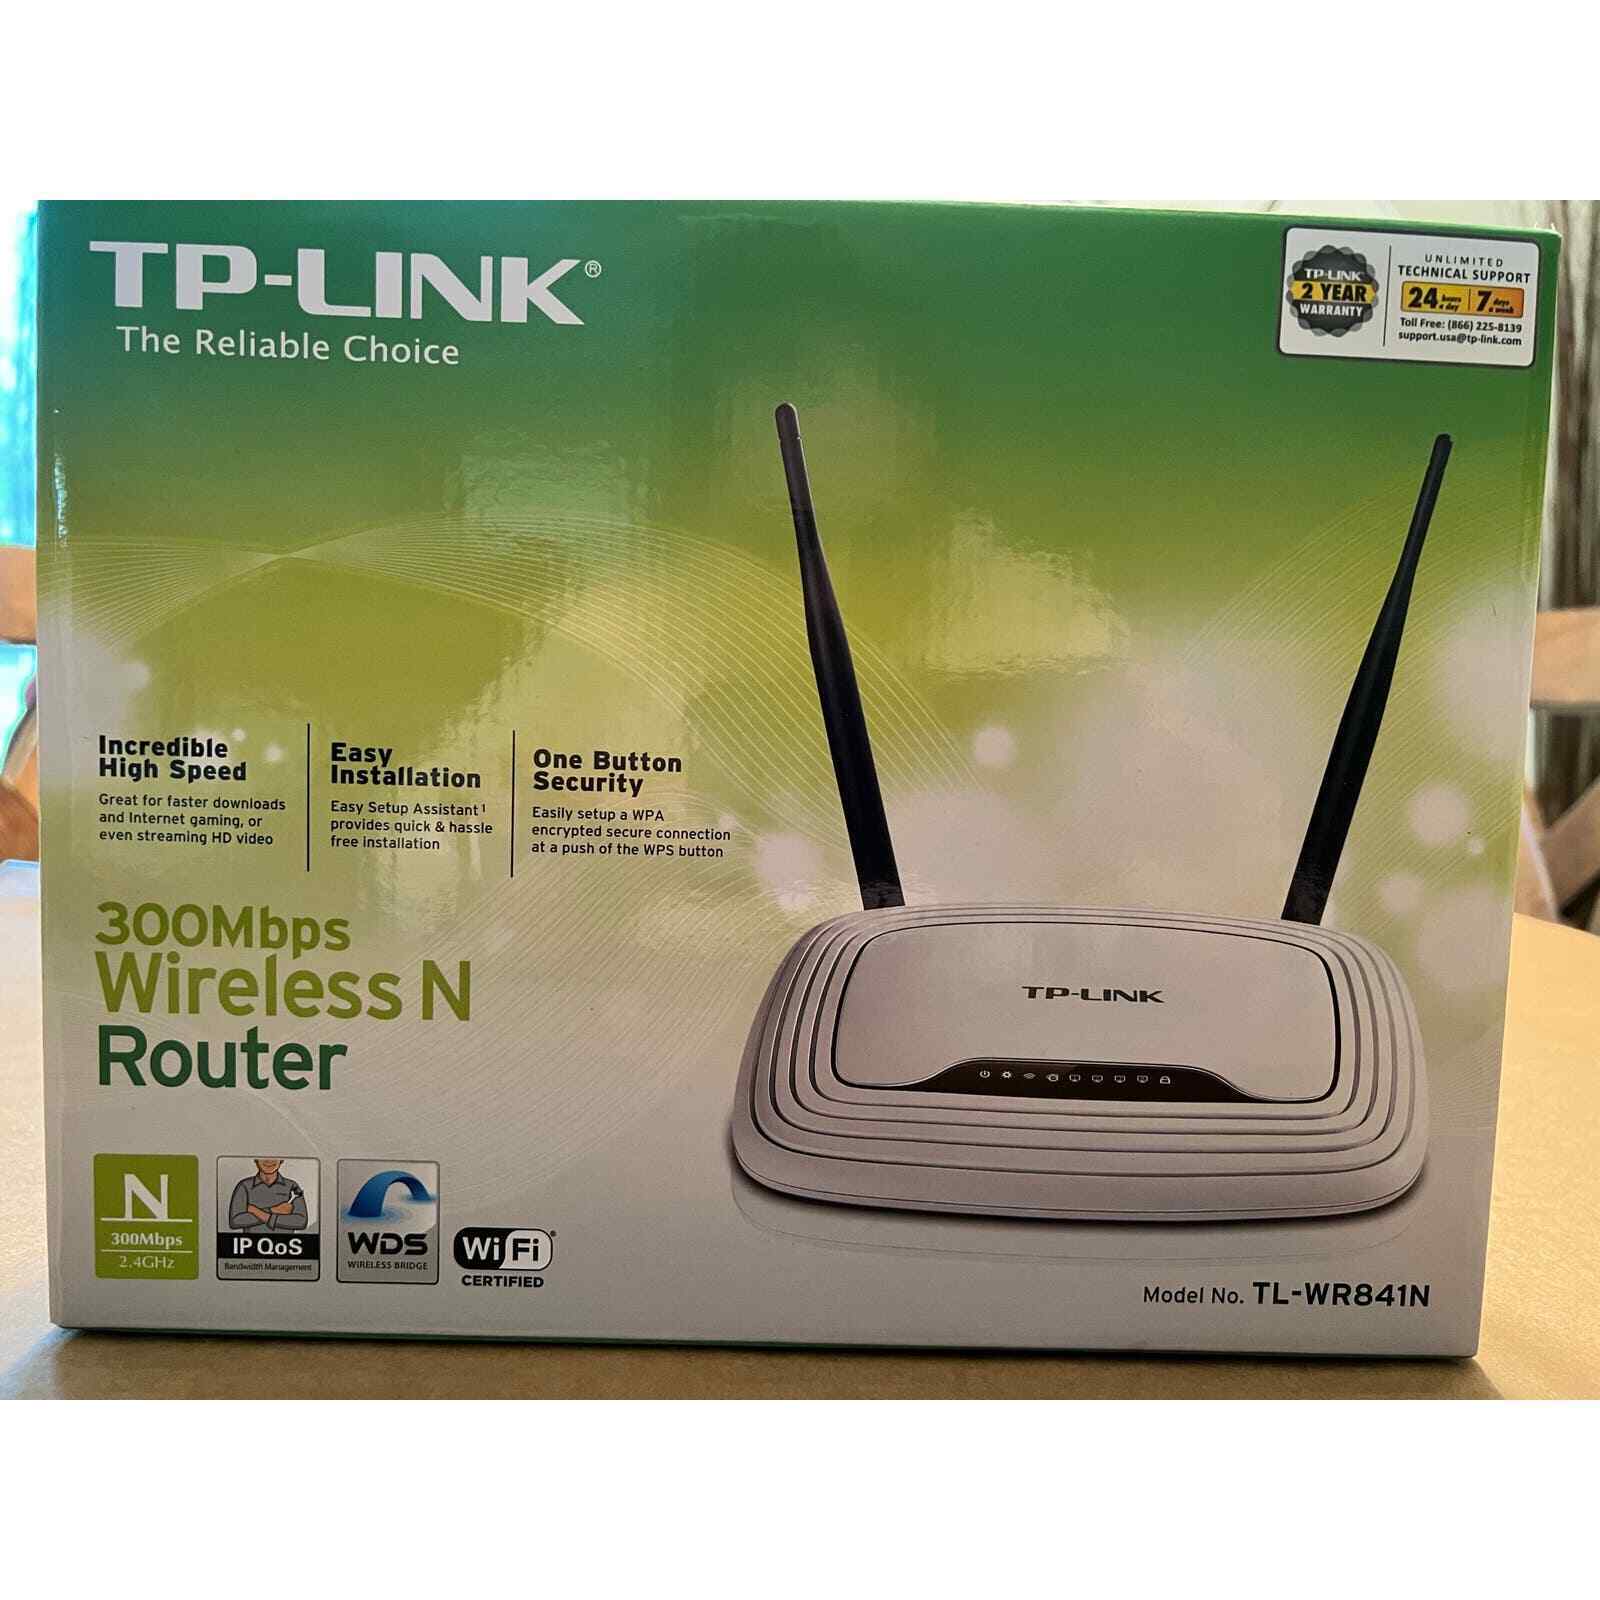 New in box - TP-Link 300mbps Wireless N Router TL-WR841N